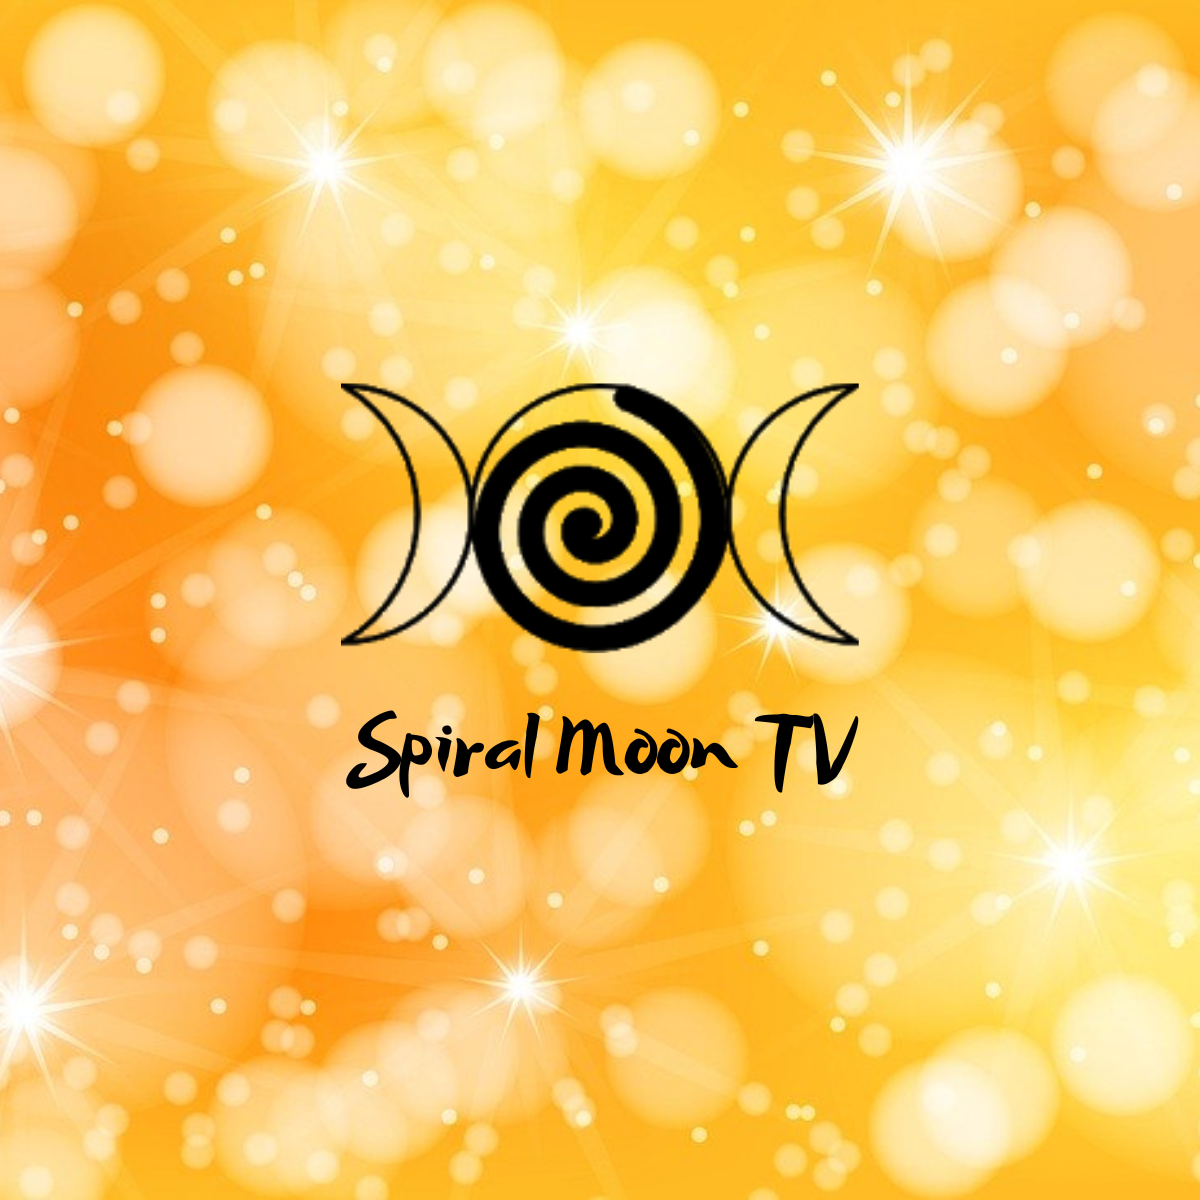 Spiral Moon TV logo on a sparkly yellow background